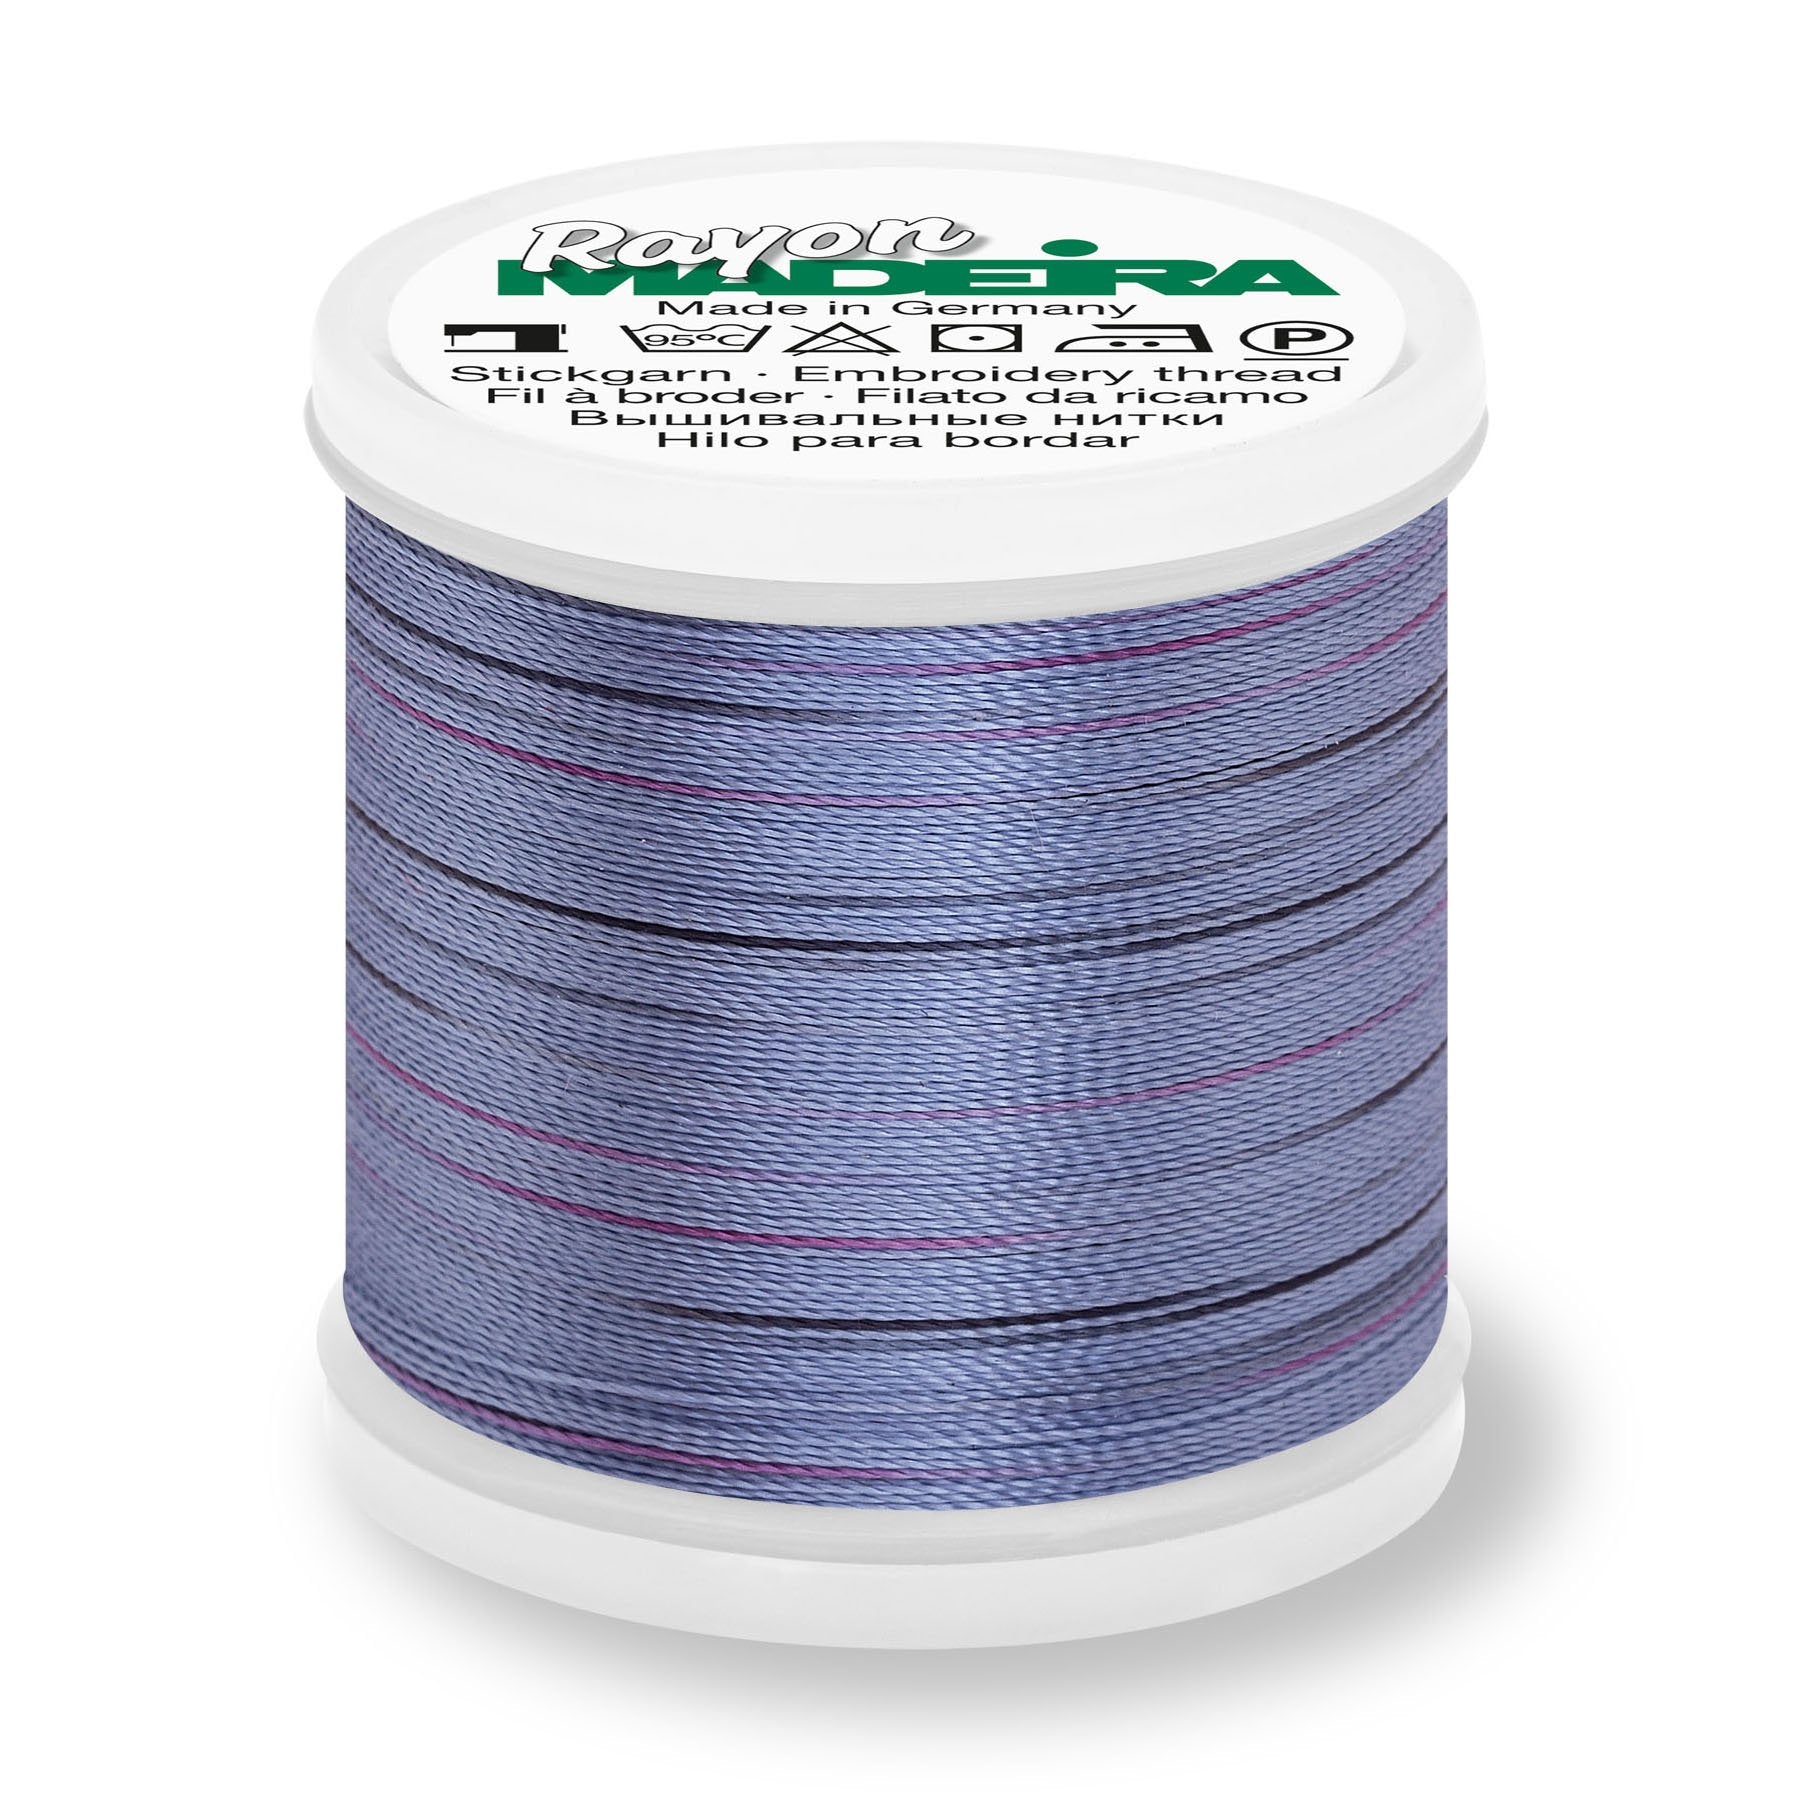 Madeira Rayon 40 Embroidery Thread 200m Potpourri 2307 Blue from Jaycotts Sewing Supplies